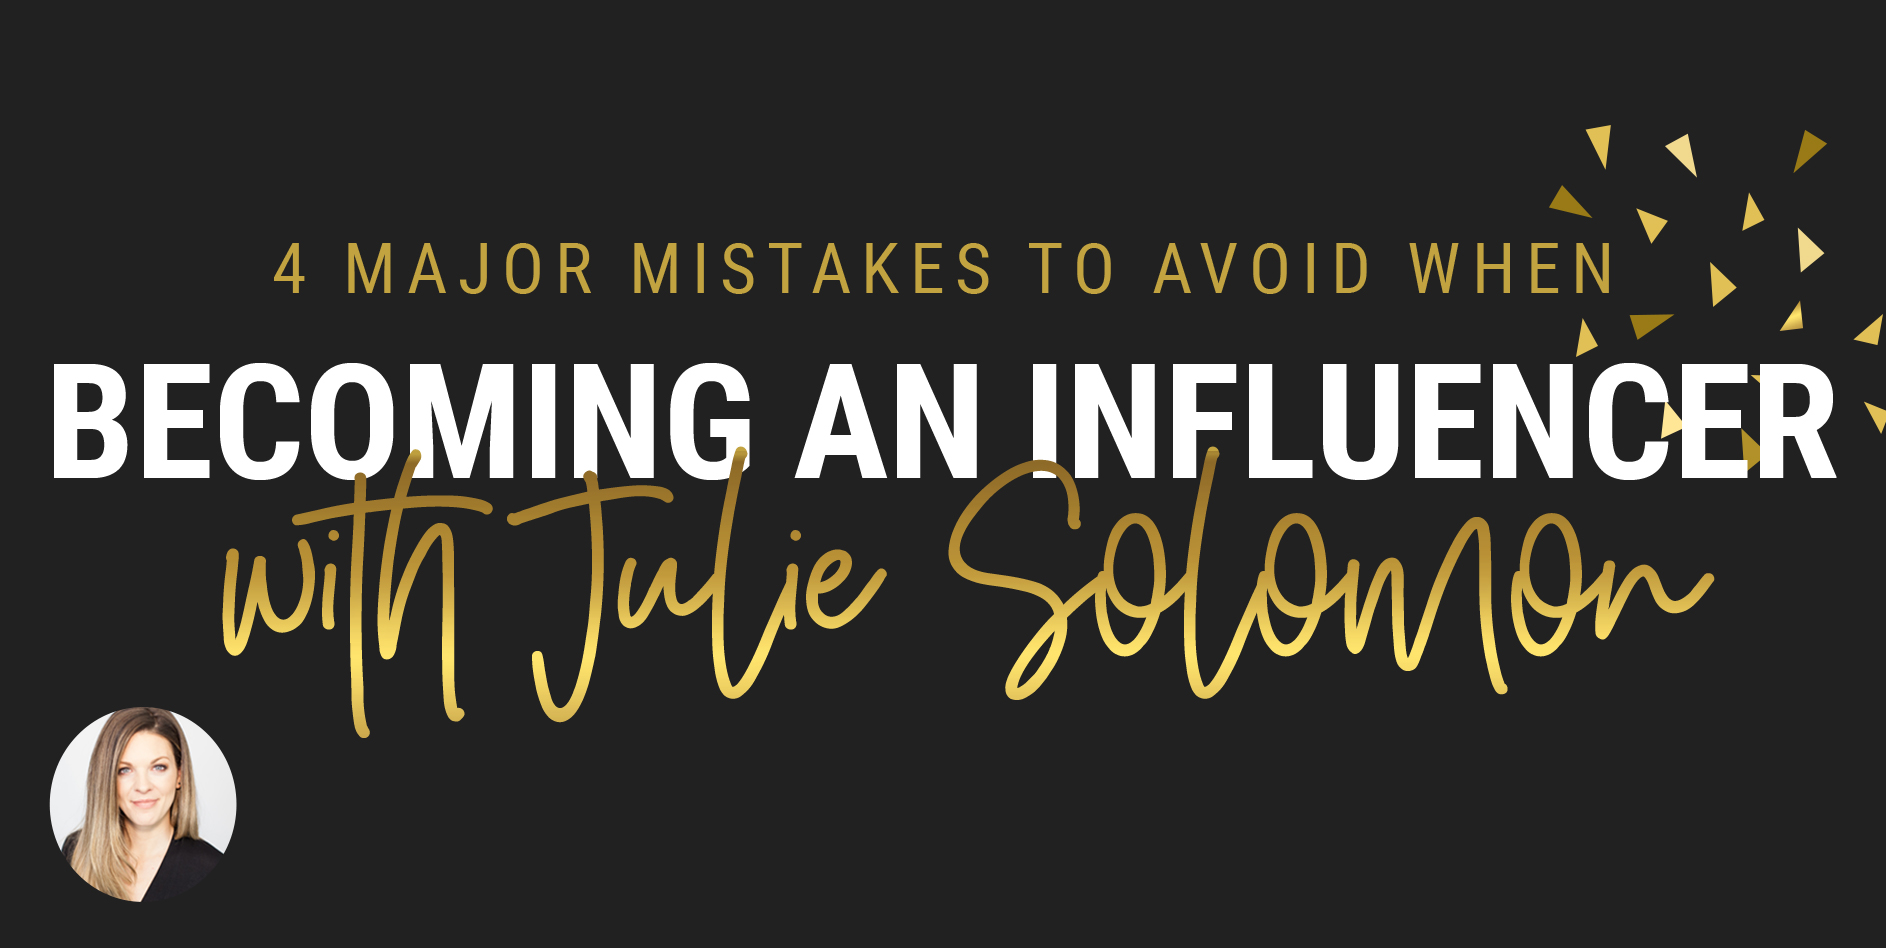 4 Major Mistakes To Avoid When Becoming an Influencer with Julie Solomon